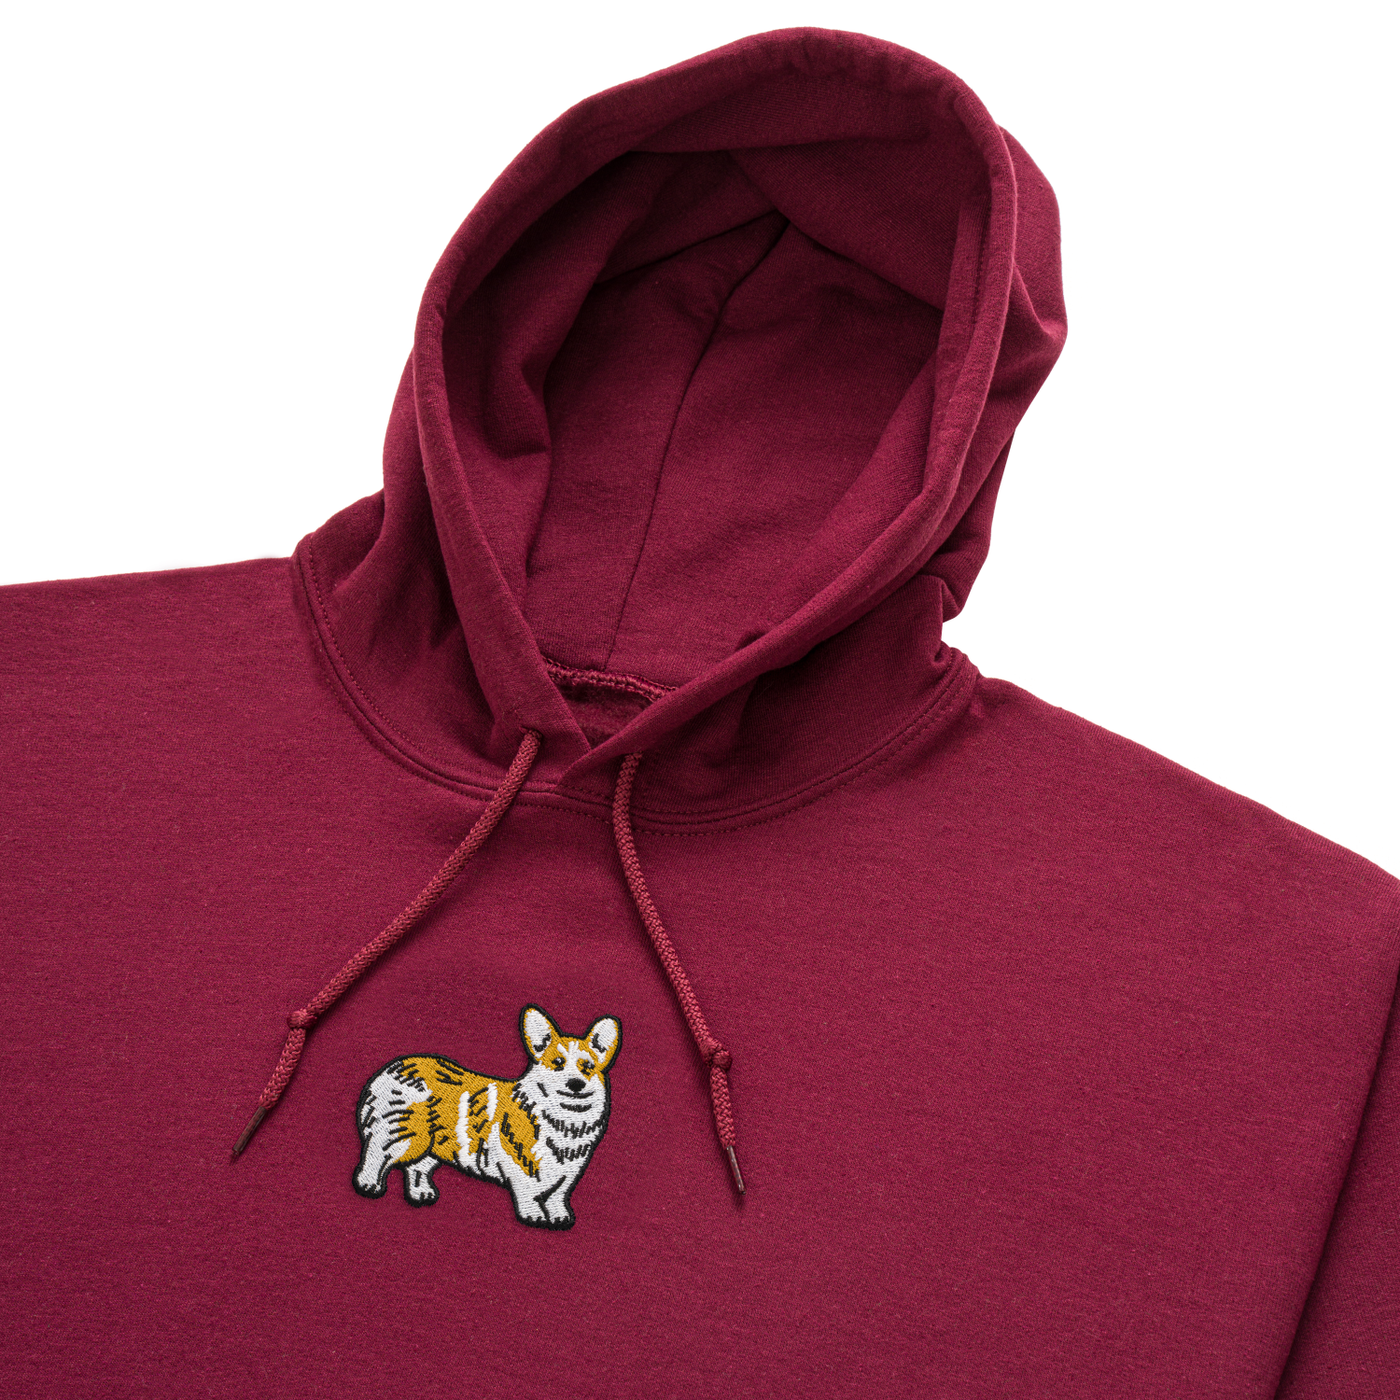 Bobby's Planet Men's Embroidered Corgi Hoodie from Paws Dog Cat Animals Collection in Maroon Color#color_maroon